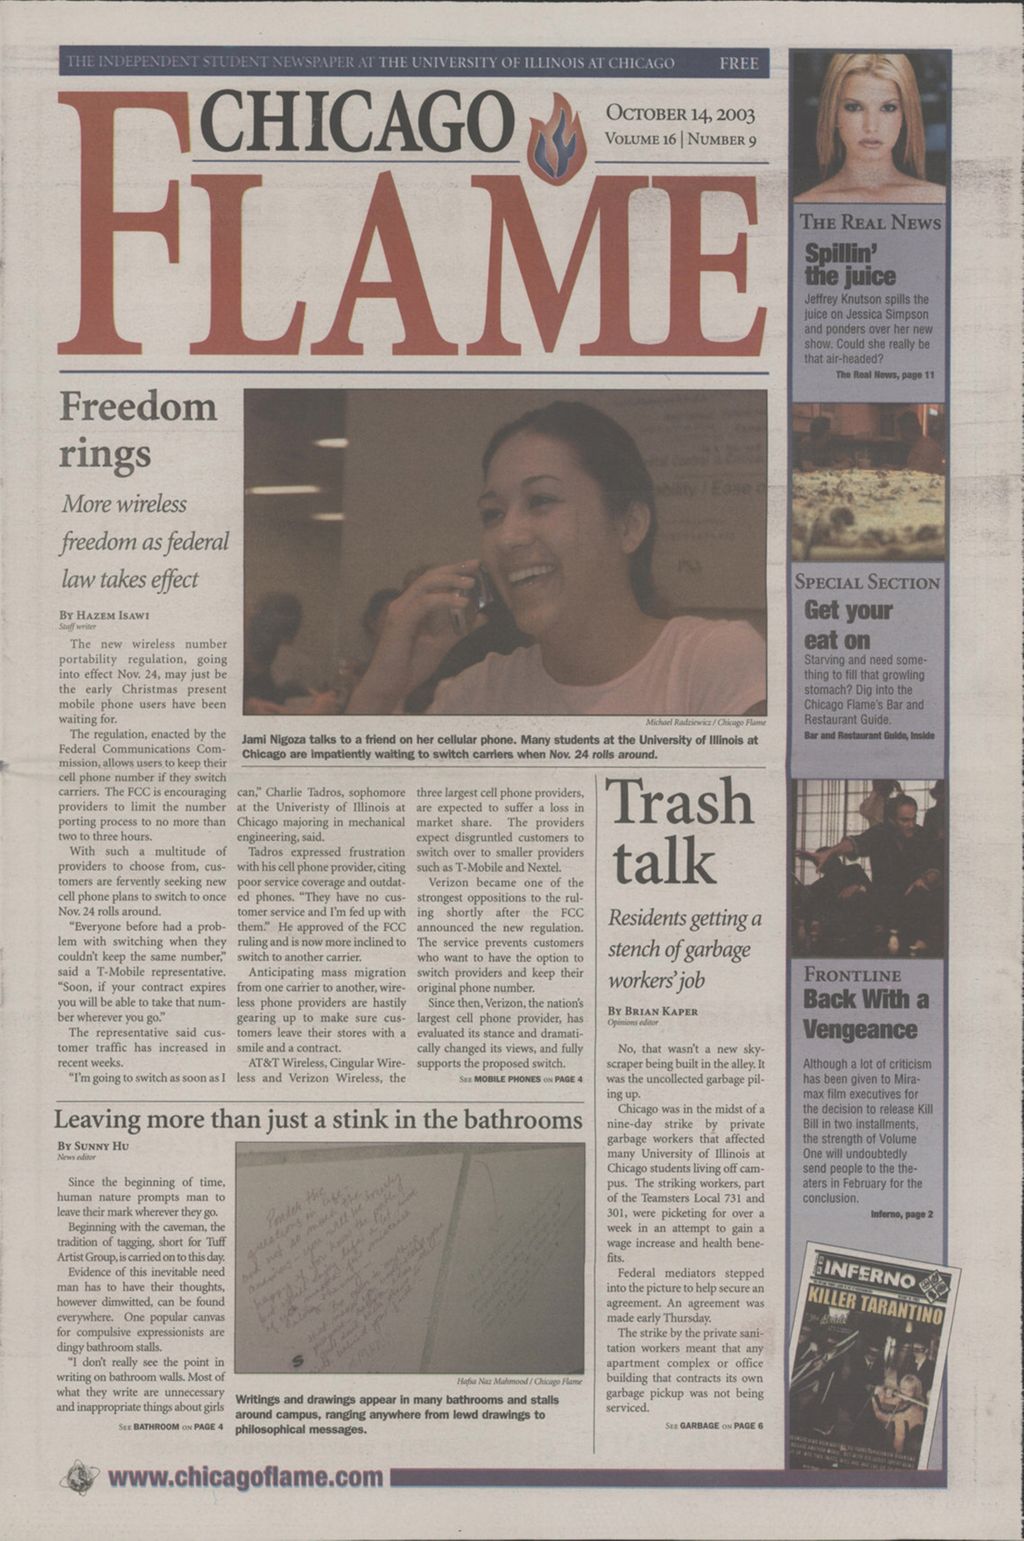 Chicago Flame (October 14, 2003)